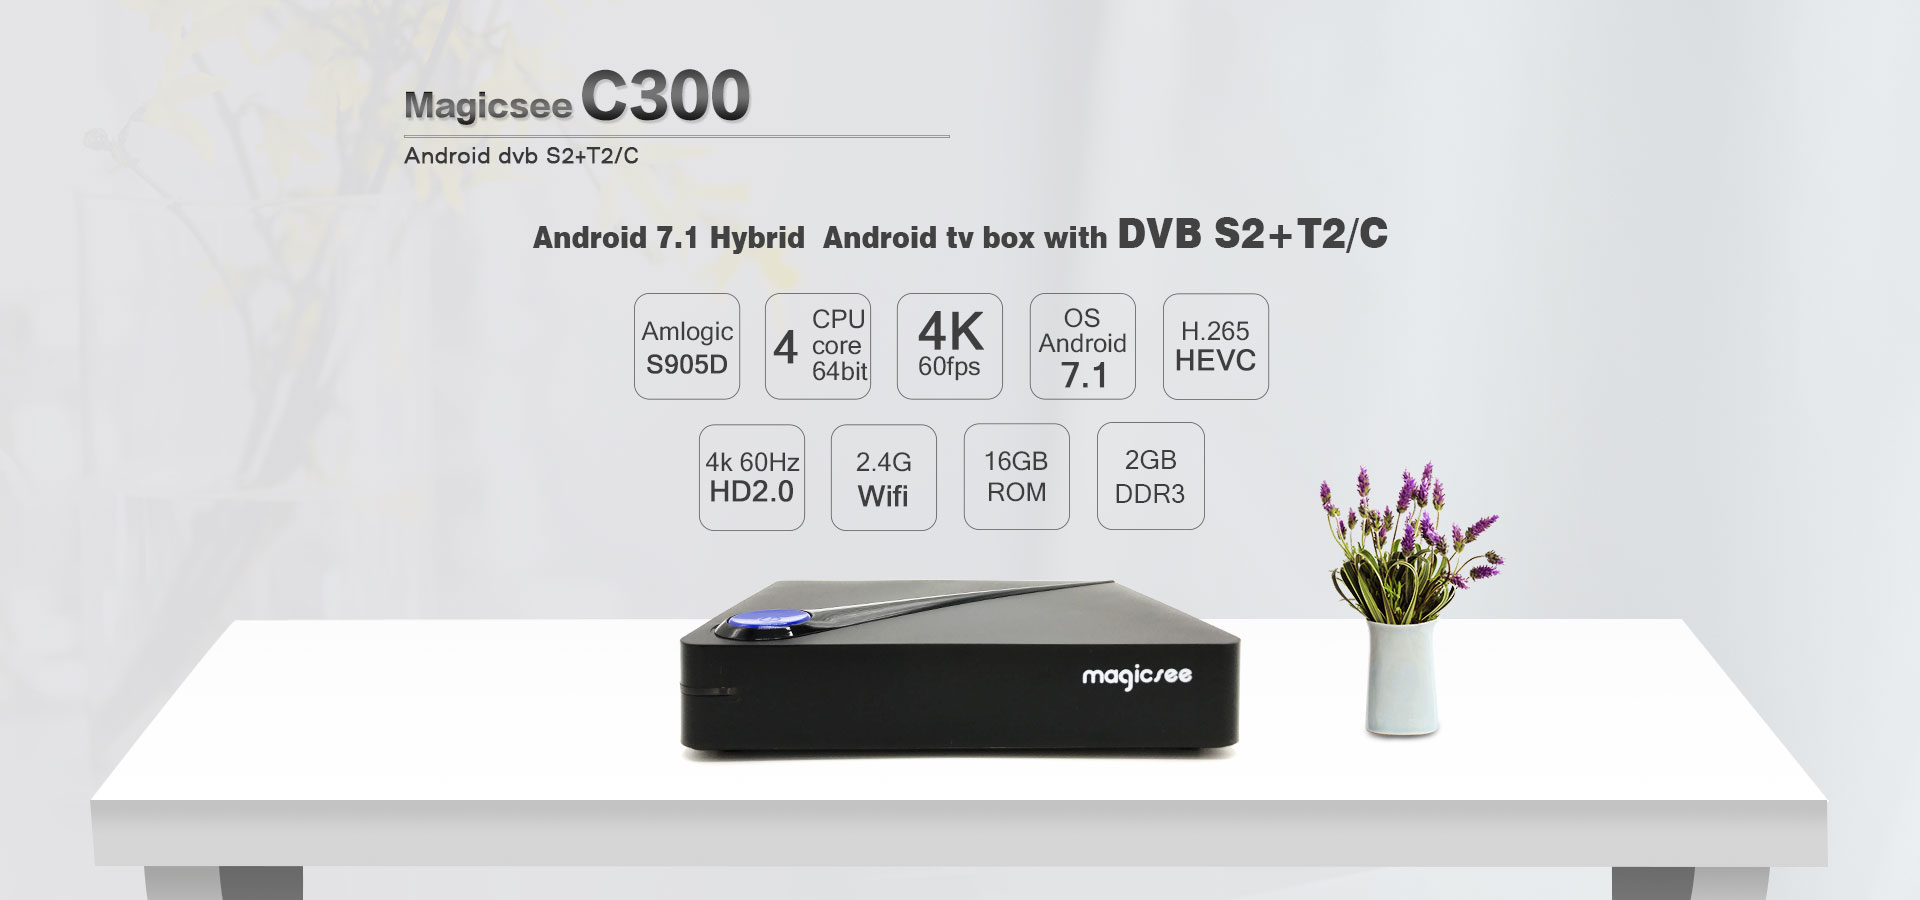 C300 Android DVB S2+T2/C